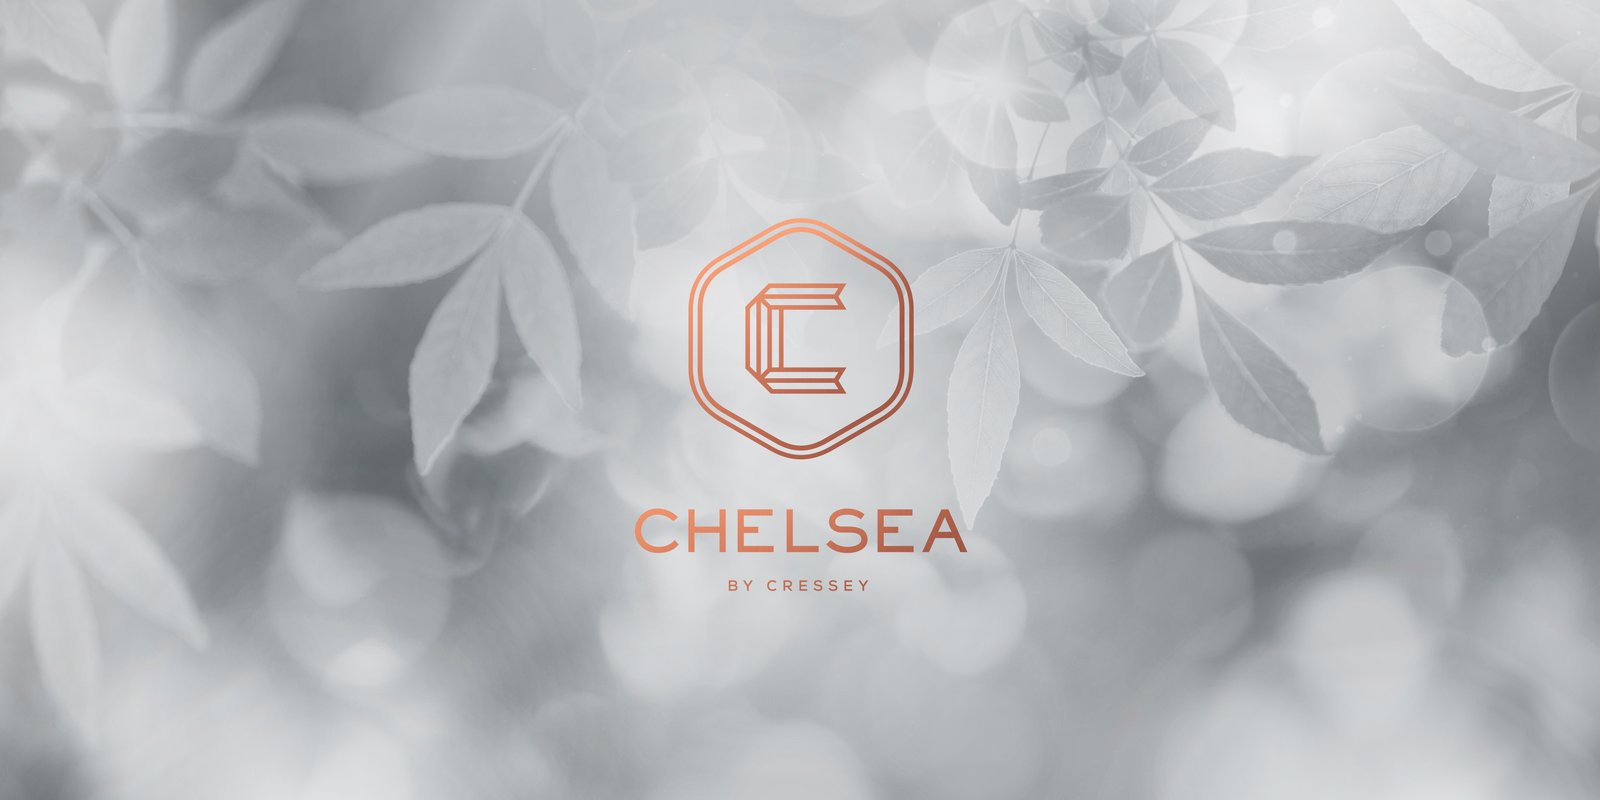 CHELSEA BY CRESSEY